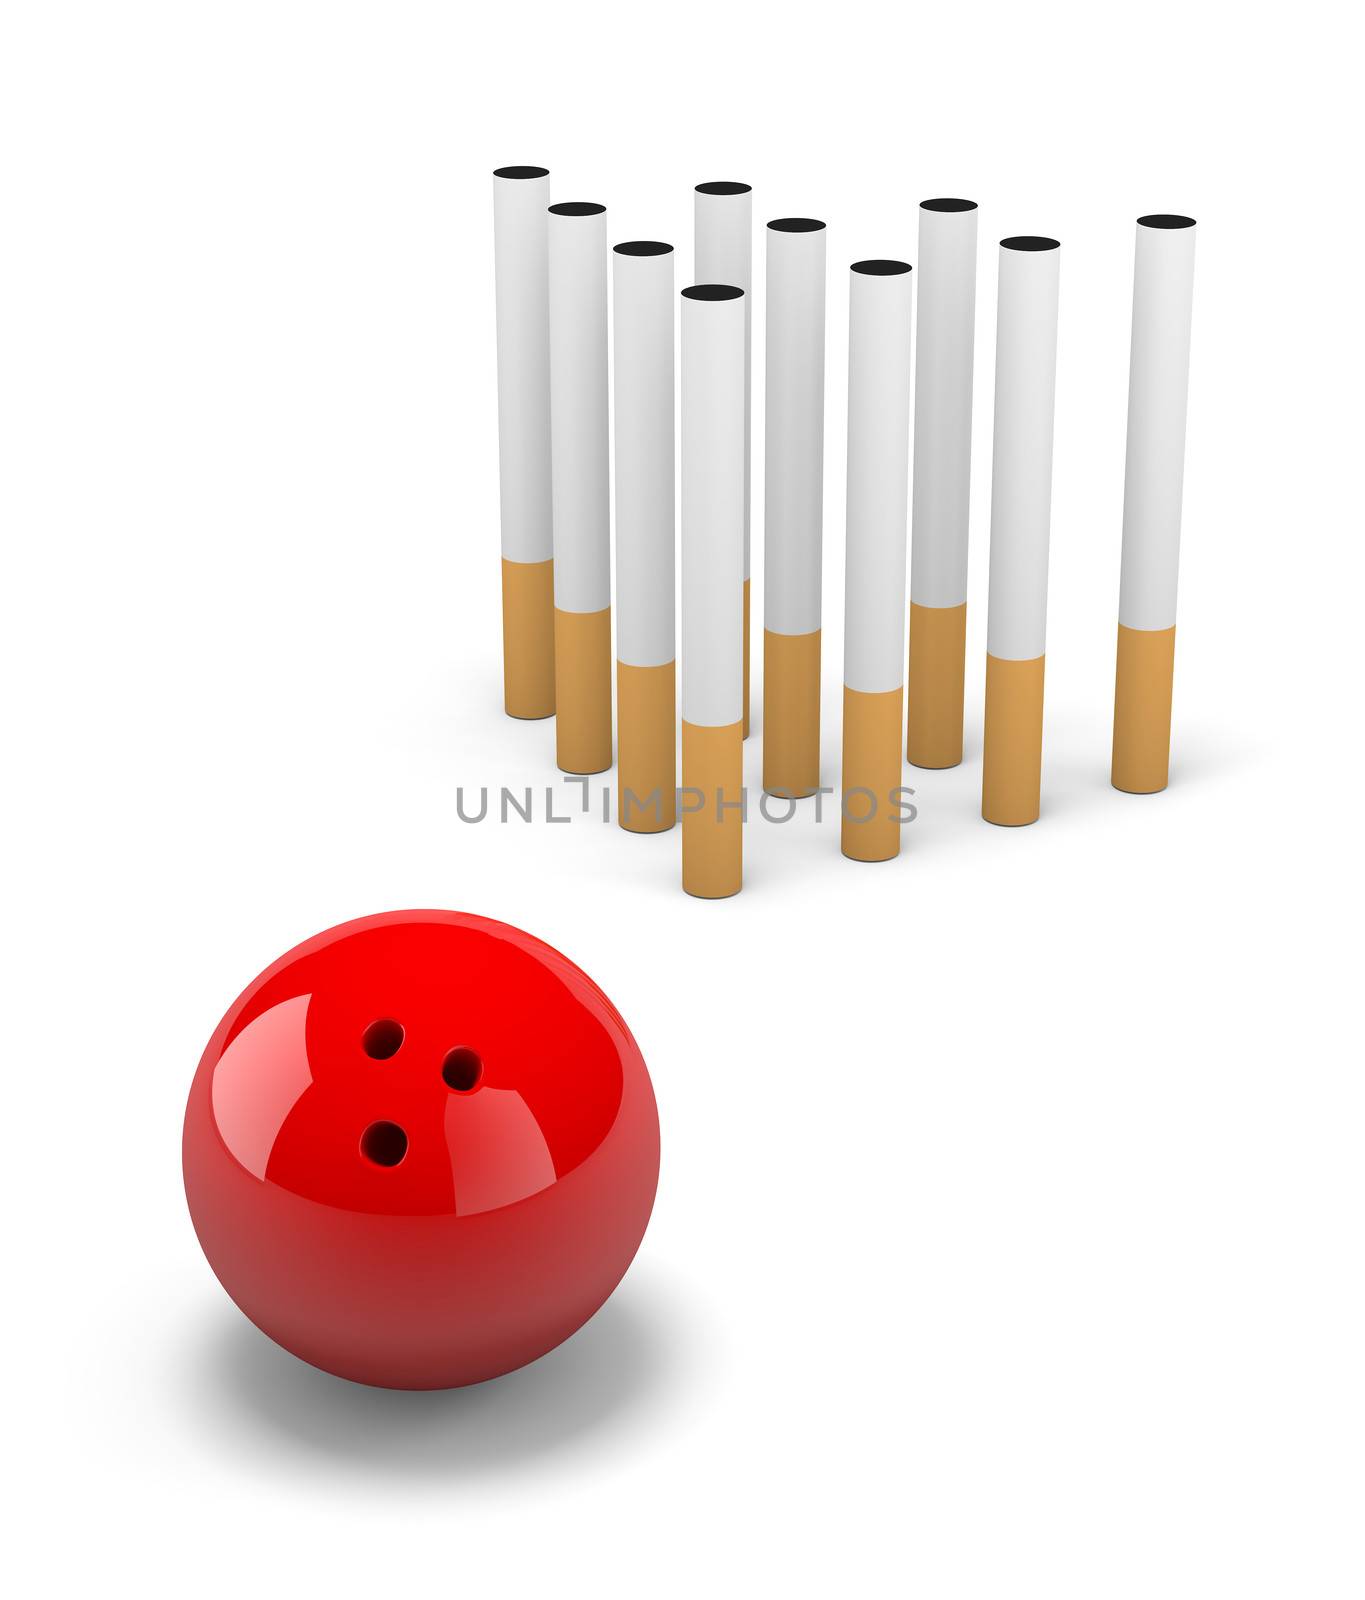 Group of Cigarette with Red Bowling Skittle Ball on White Background 3D Illustration